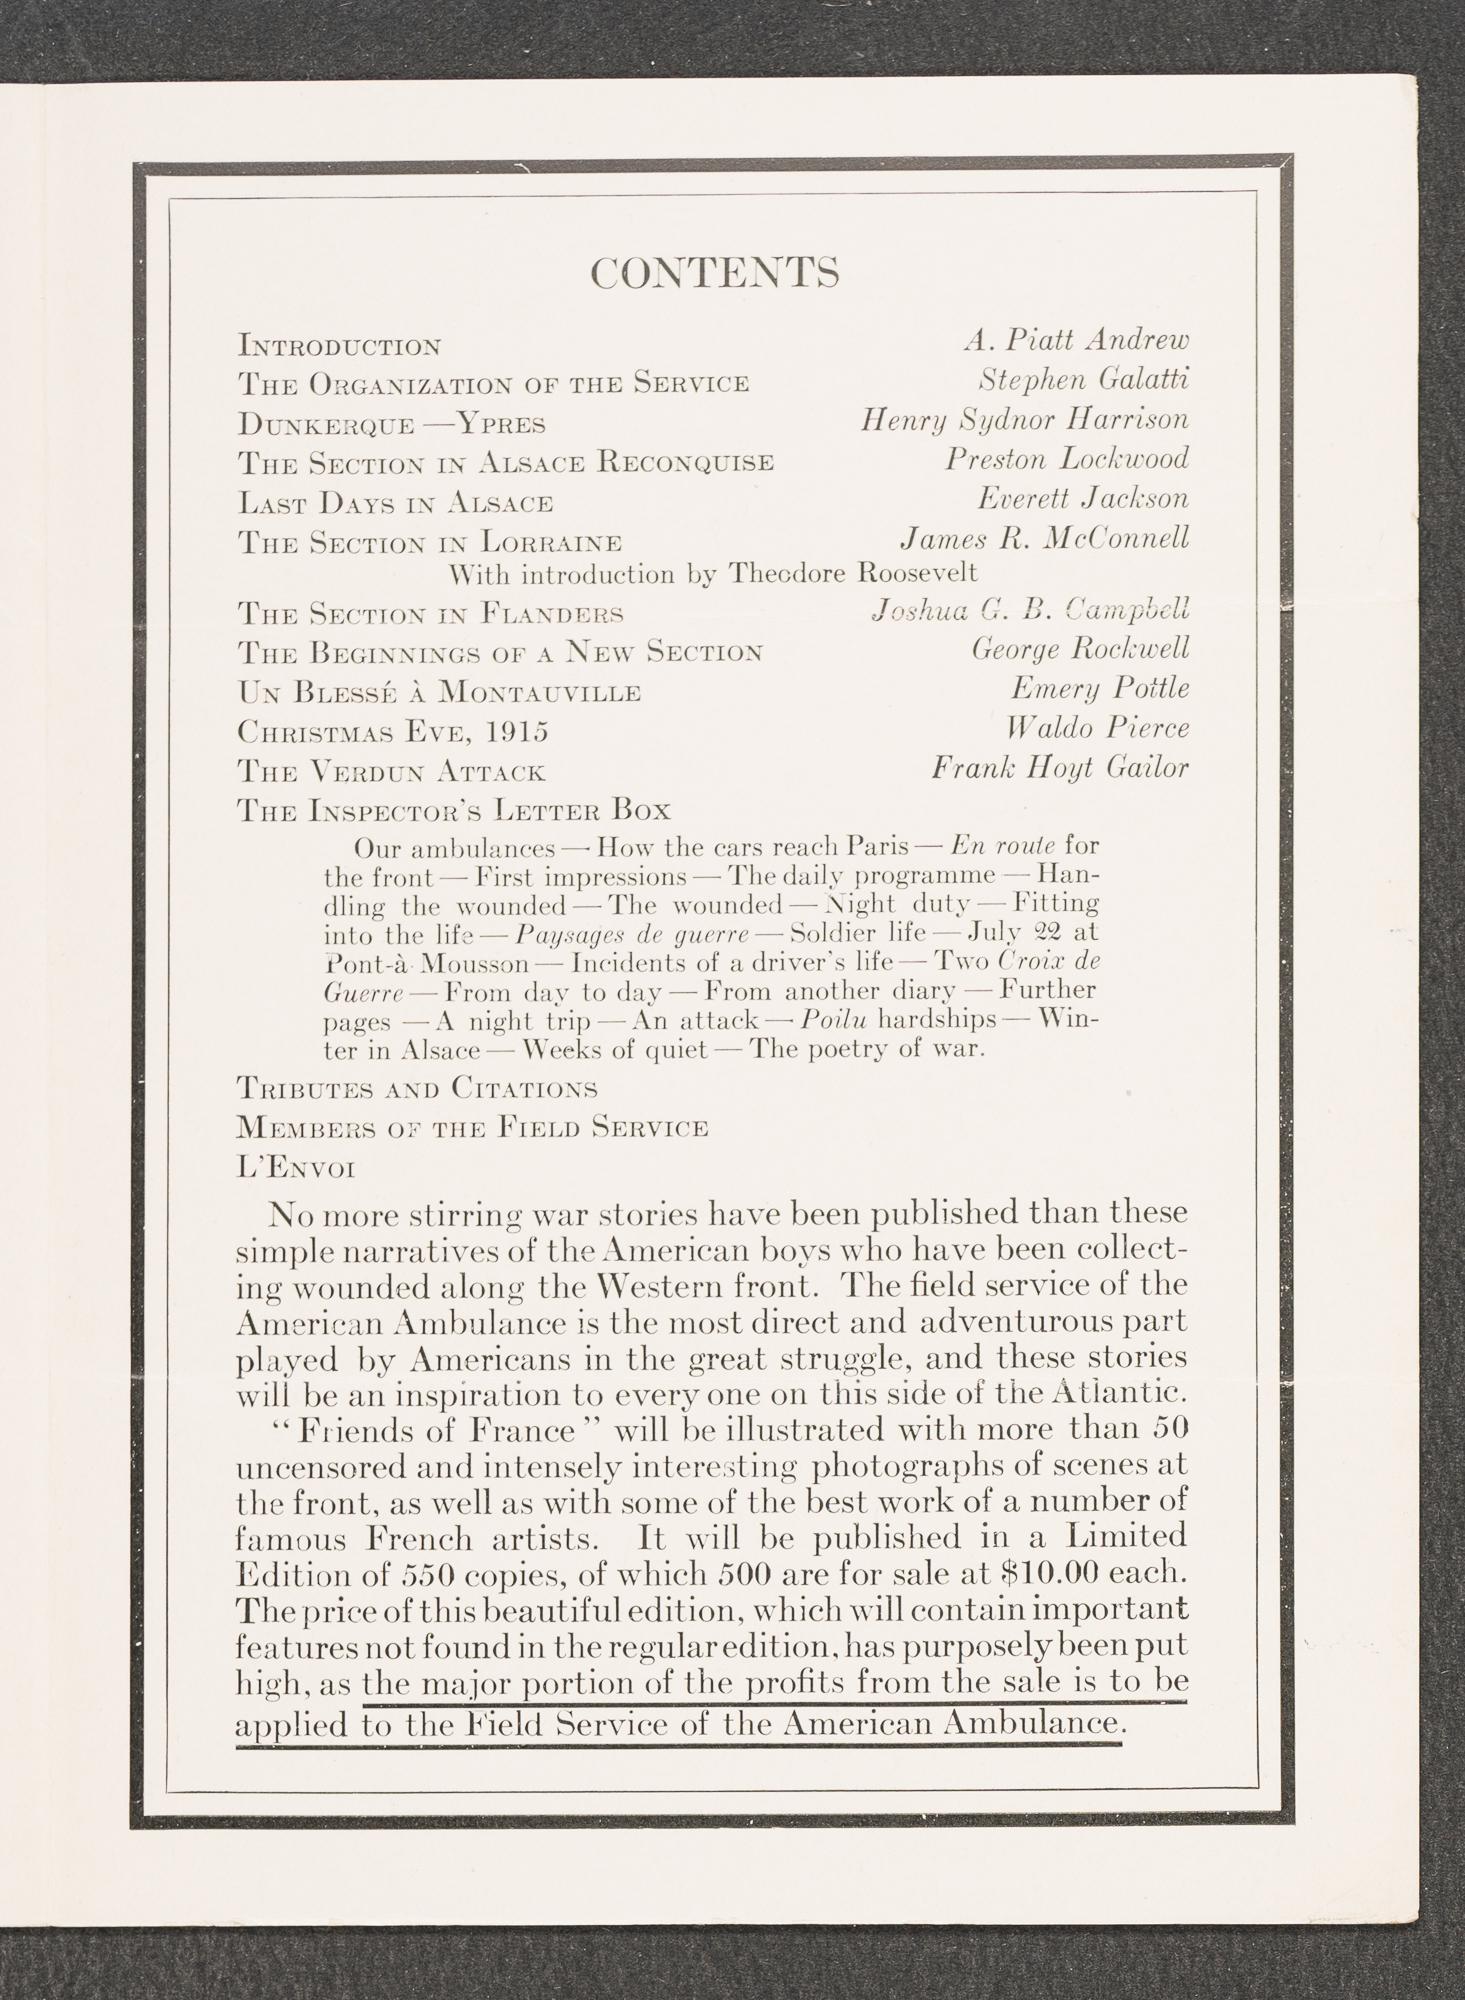 A table of contents for a pamphlet on the Friends of France.